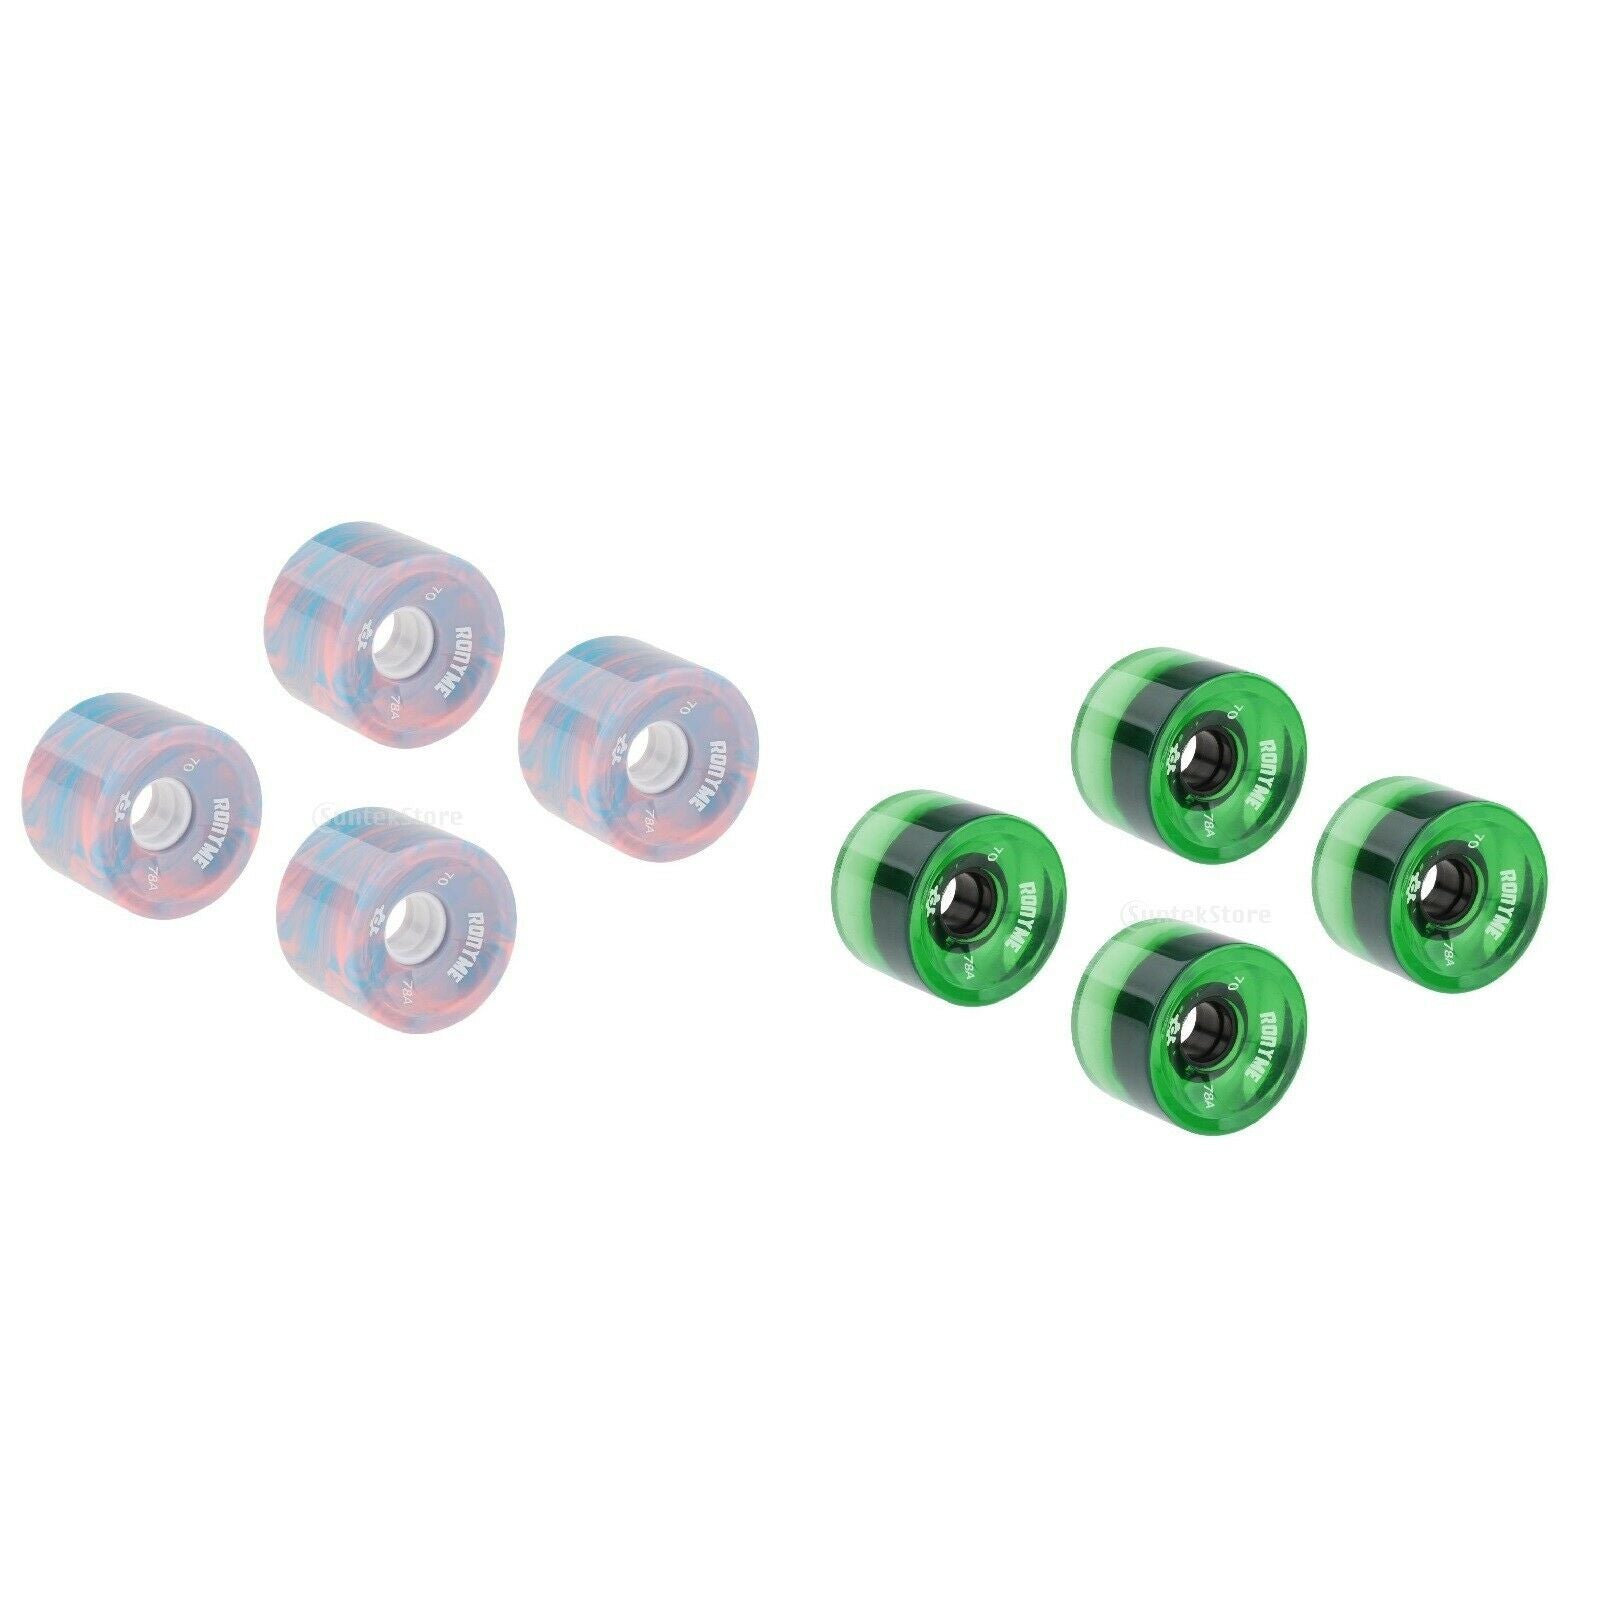 8Pcs Skateboard Wheels Roller 78A ABEC-9 Bearing Casing Parts Accessories